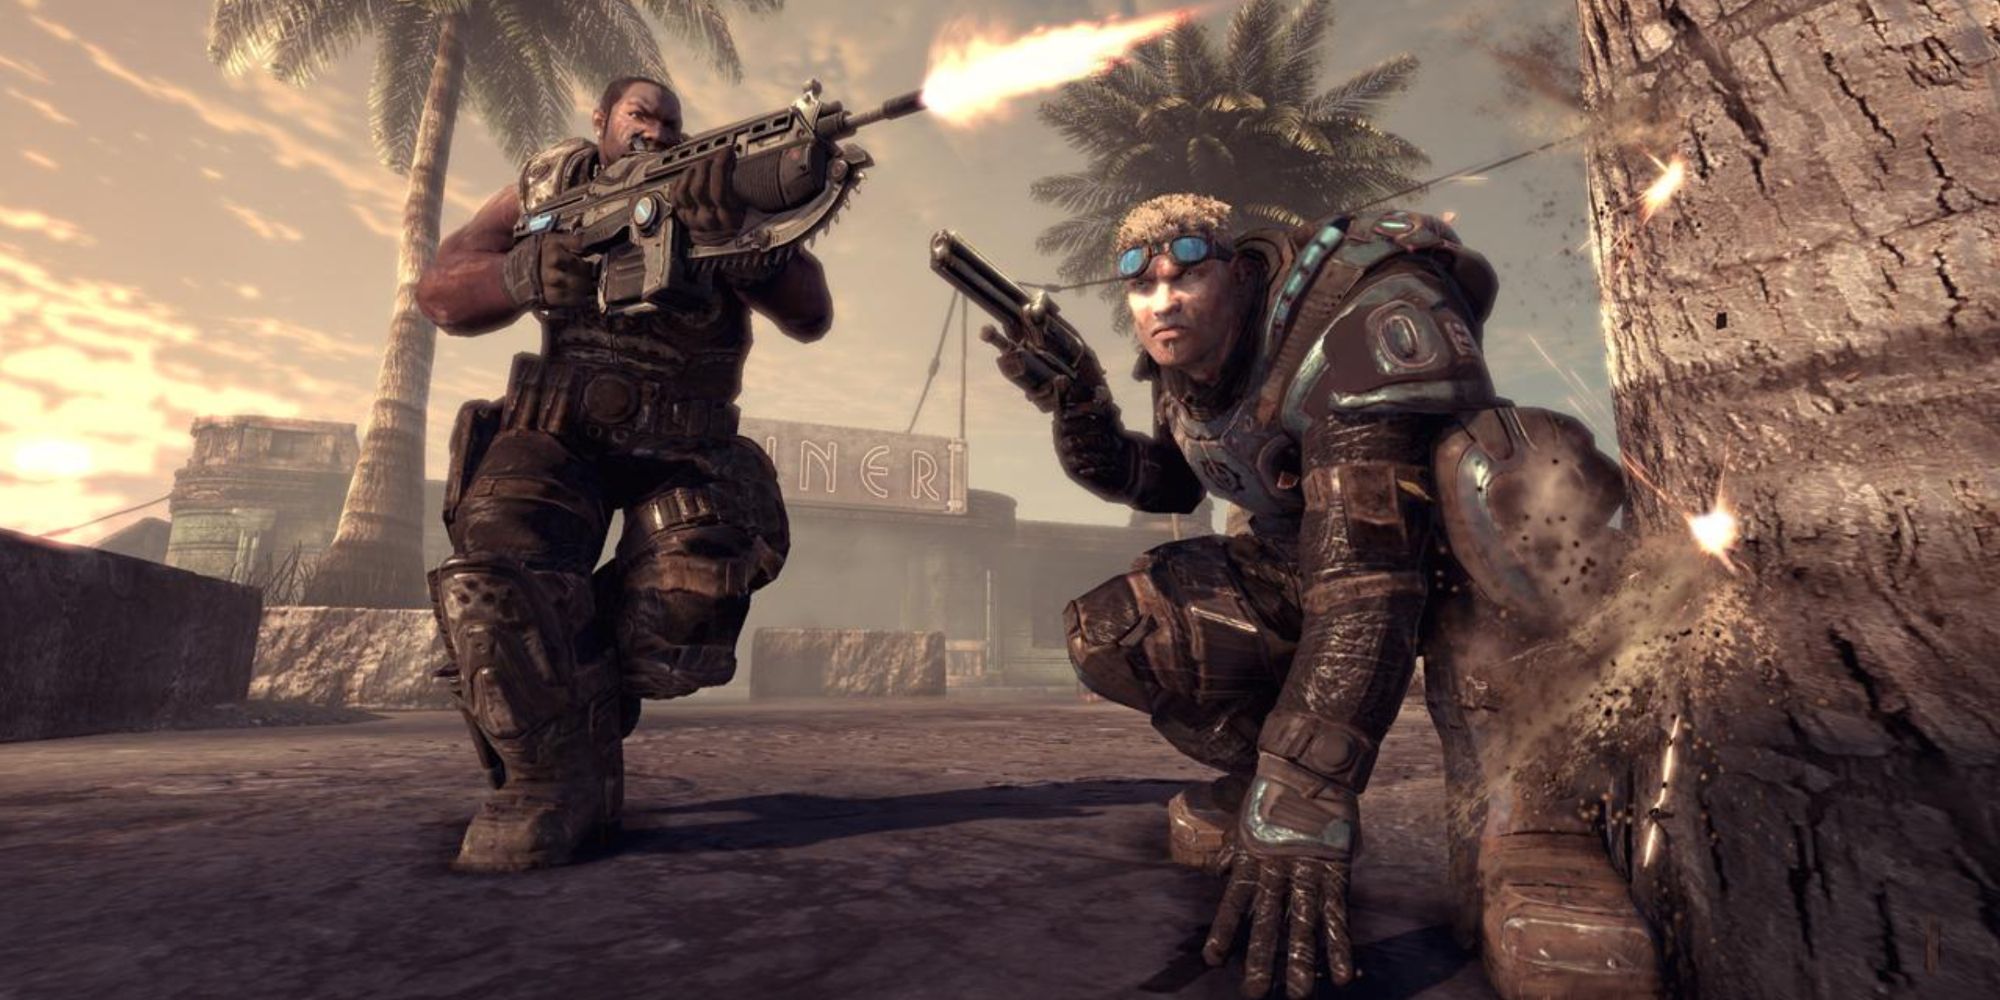 Gears of War 2 Online handed out one of the most severe cheating punishments ever